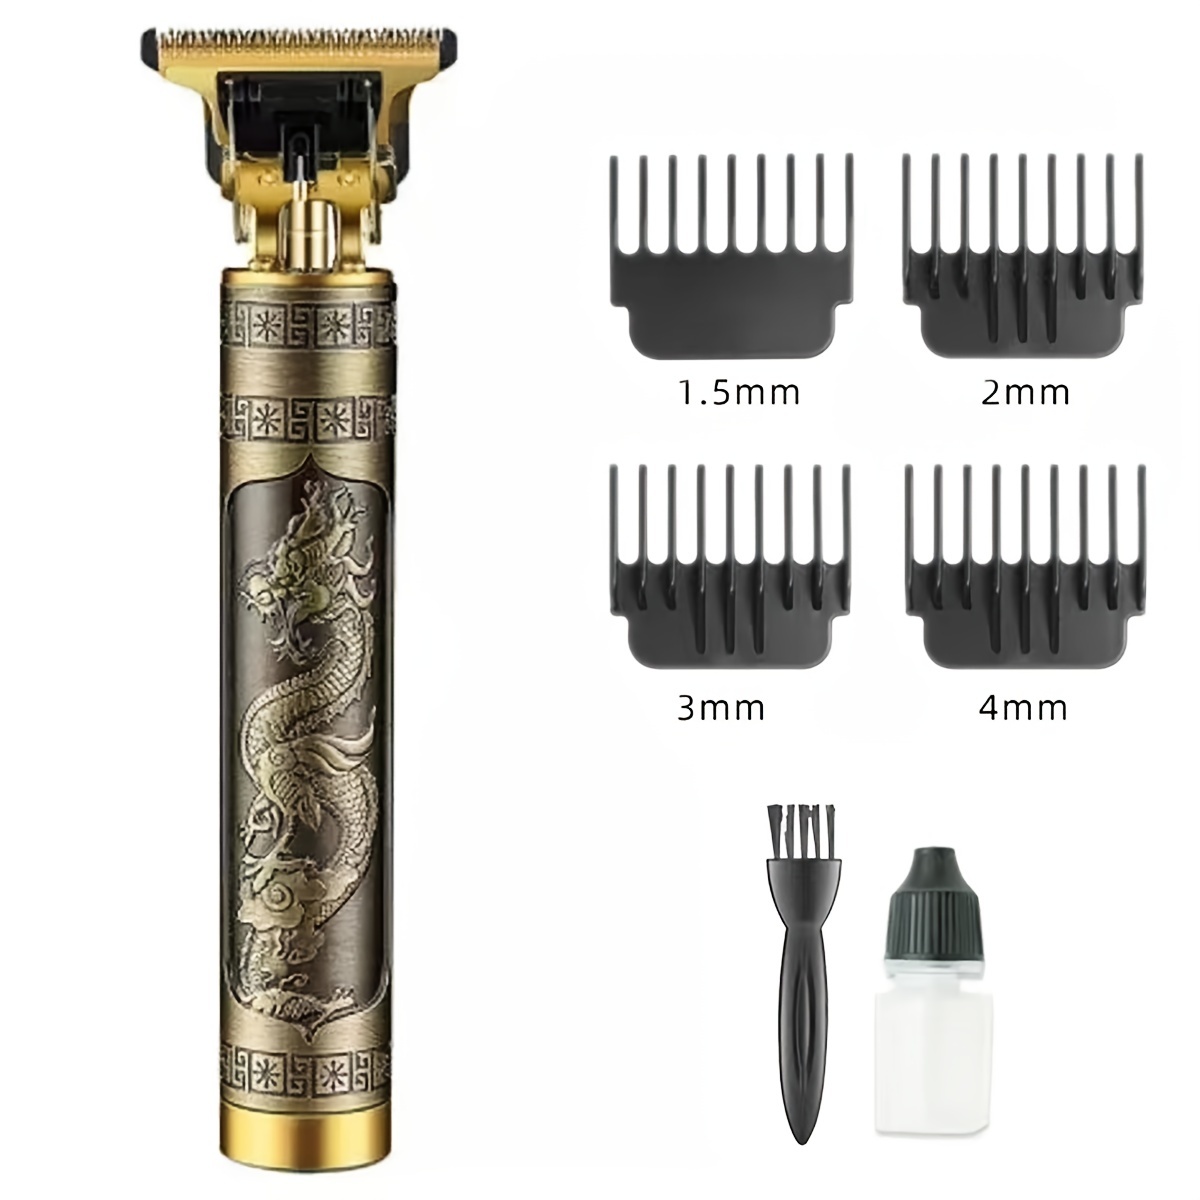 Amazon.com: Suttik Professional Hair & Beard Trimmer for Barber, T-Blade  Hair Edgers Clippers, Gold Knight Close-Cutting Trimmers, Cordless Clippers  for Hair Cutting, Gift for Men : Beauty & Personal Care